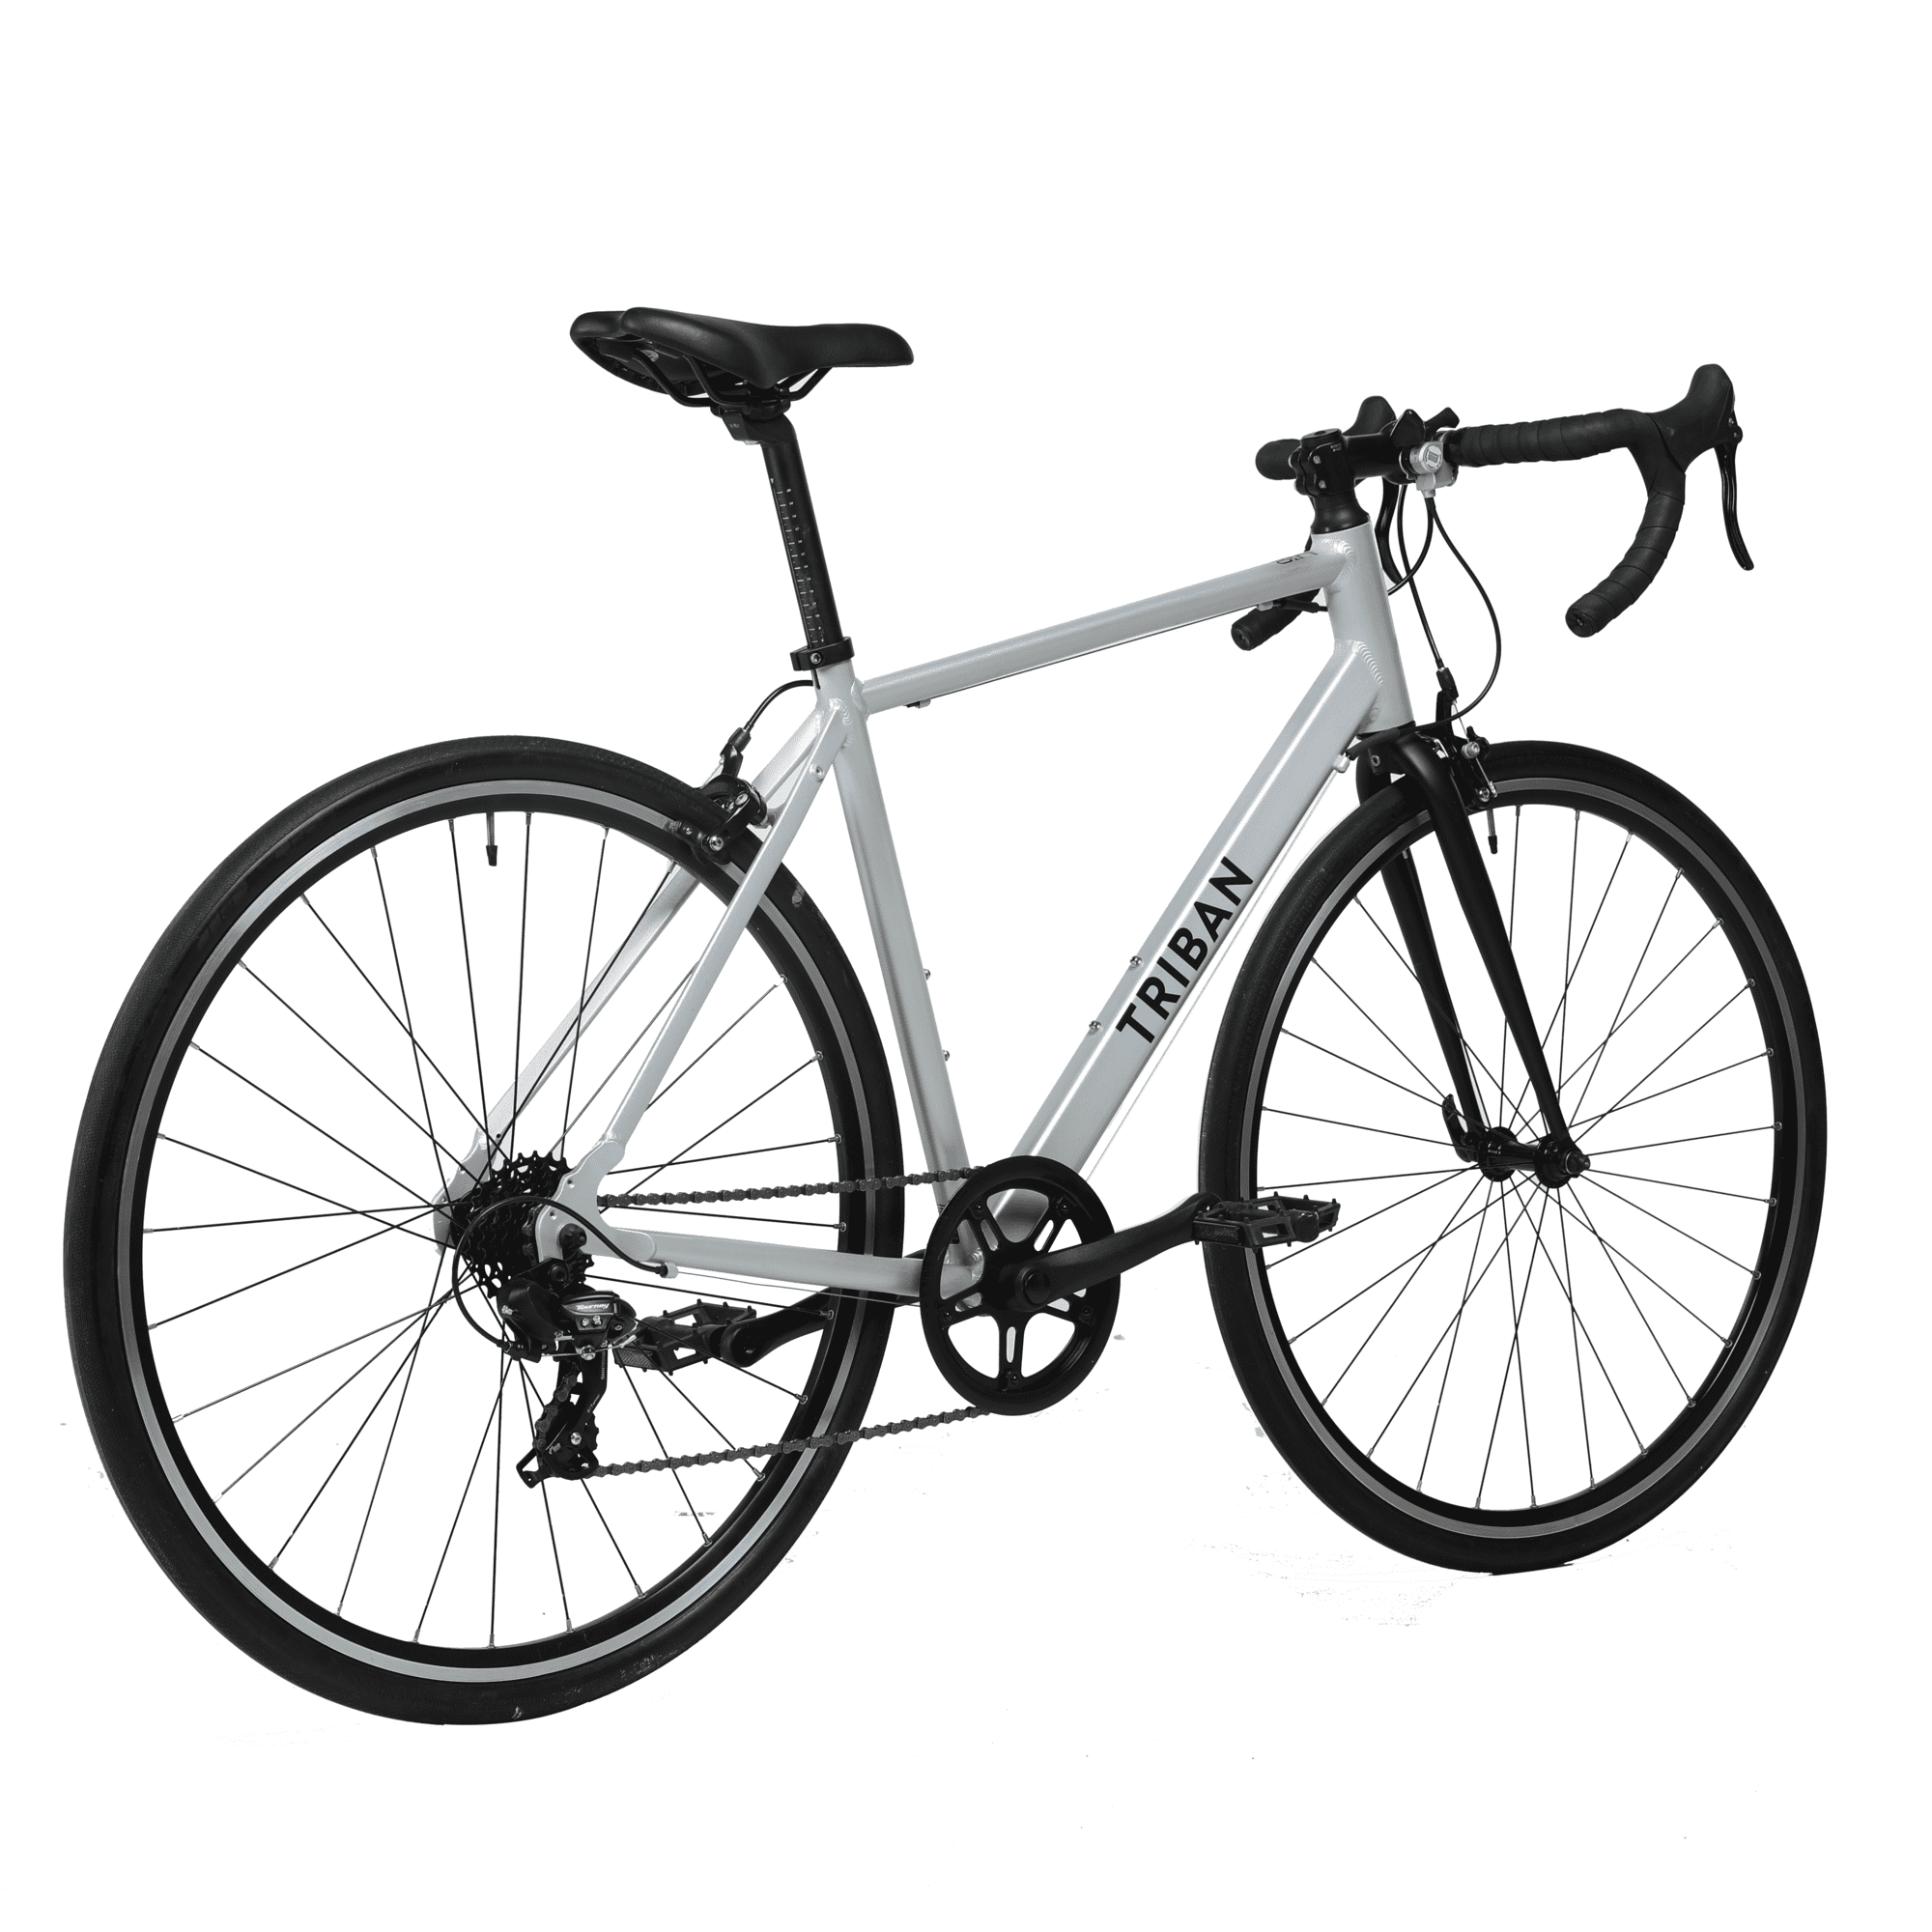 Decathlon Triban Abyss RC100, Aluminum Road Bike, 700c, 7 Speed, Silver, Small